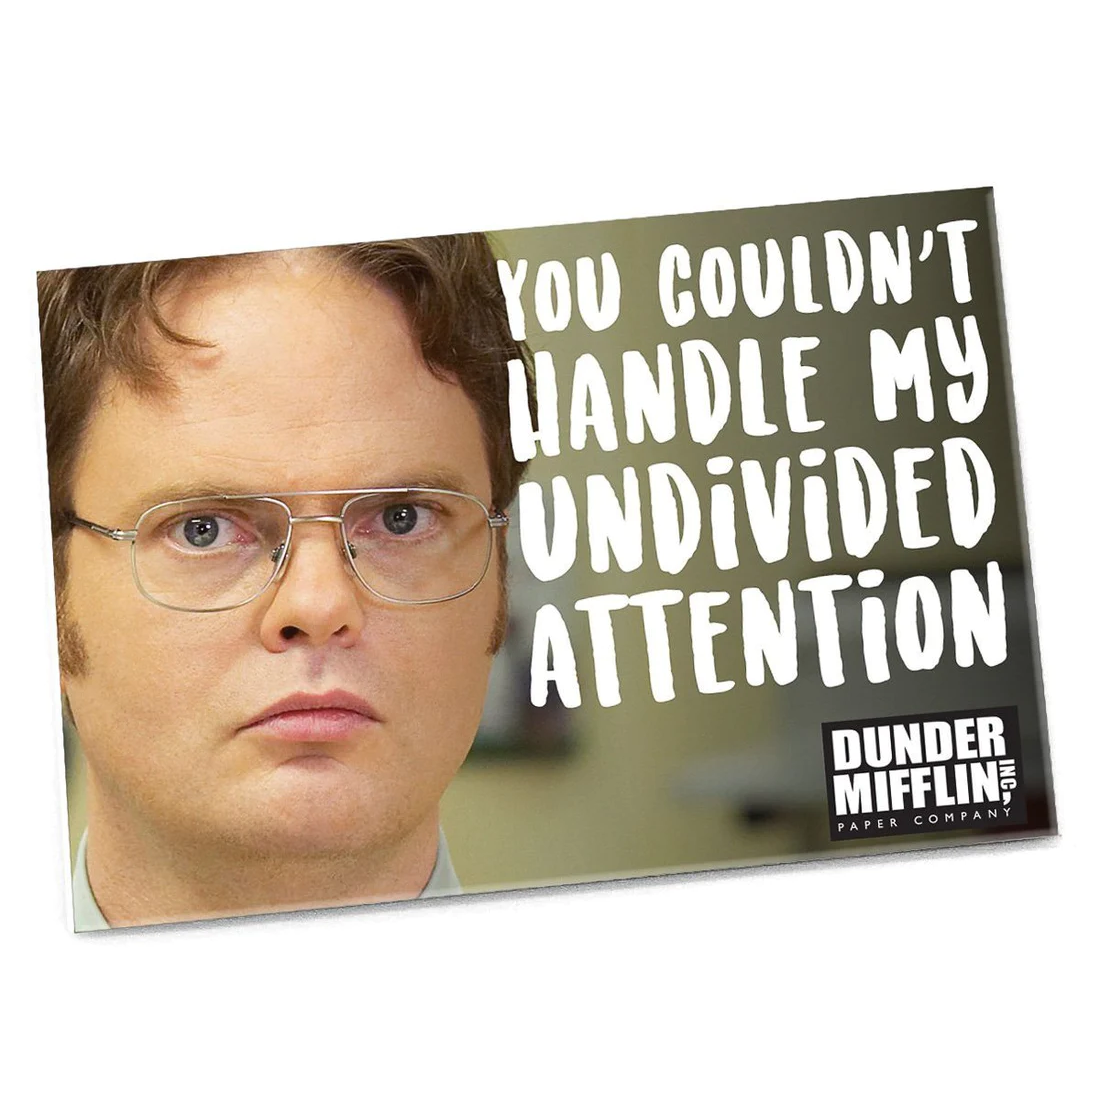 The Office Undivided Attention Magnet